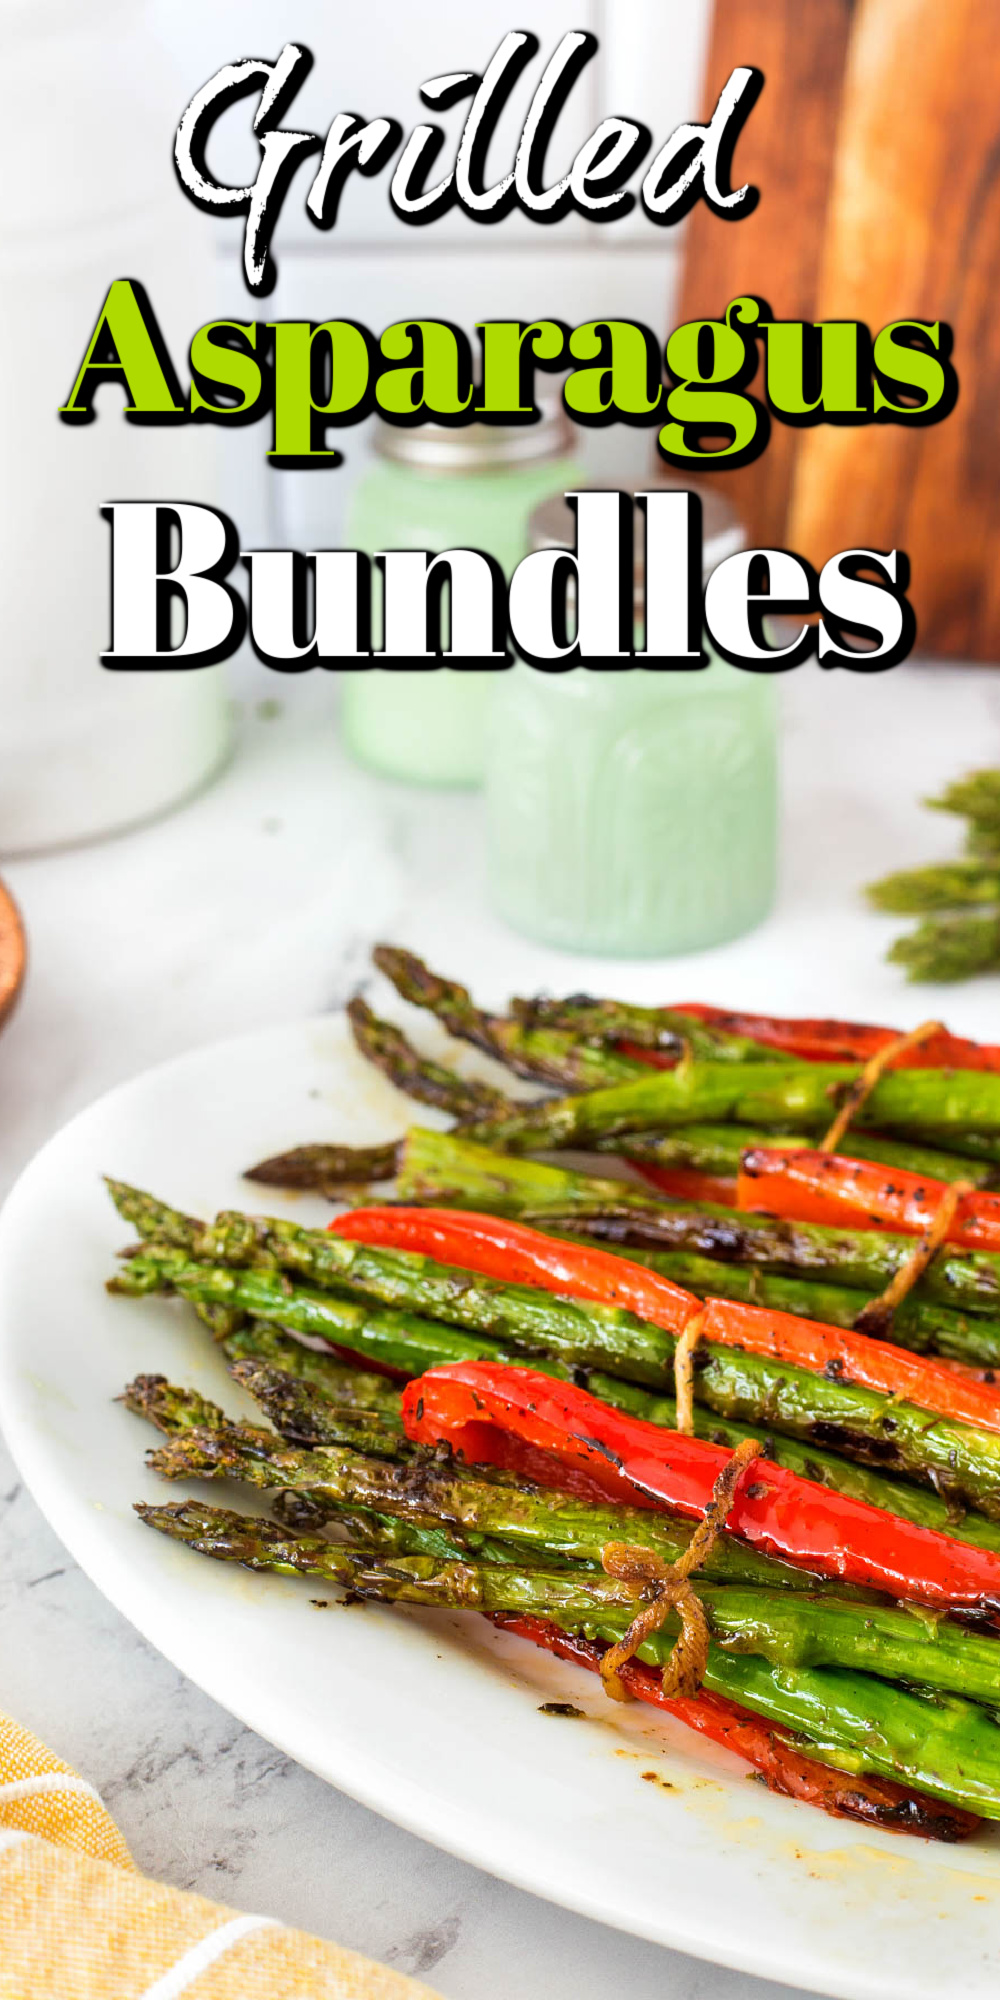 These Grilled Asparagus Bundles may just be one of the simplest side dishes you can make! Best of all, it is quick, easy and really great tasting!